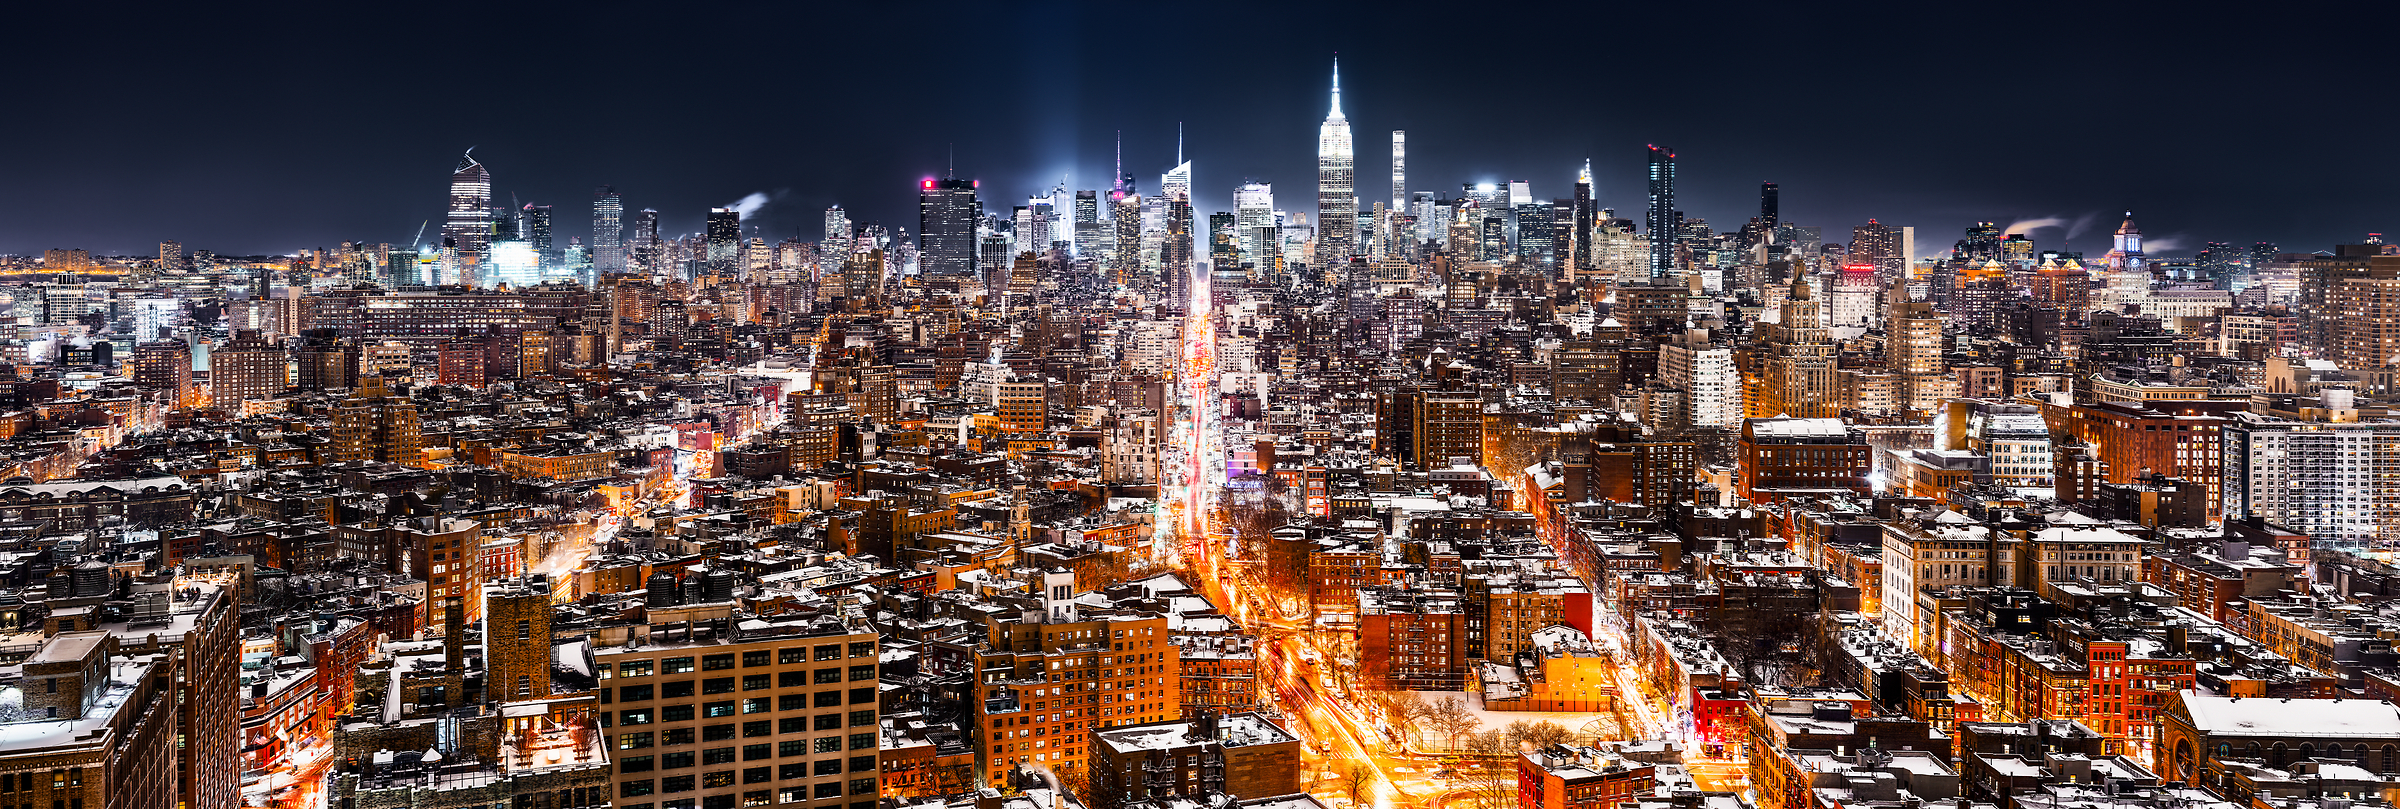 5,910 megapixels! A very high resolution, large-format VAST photo print of the NYC skyline at night; cityscape fine art photo created by Dan Piech in Midtown Manhattan, New York City